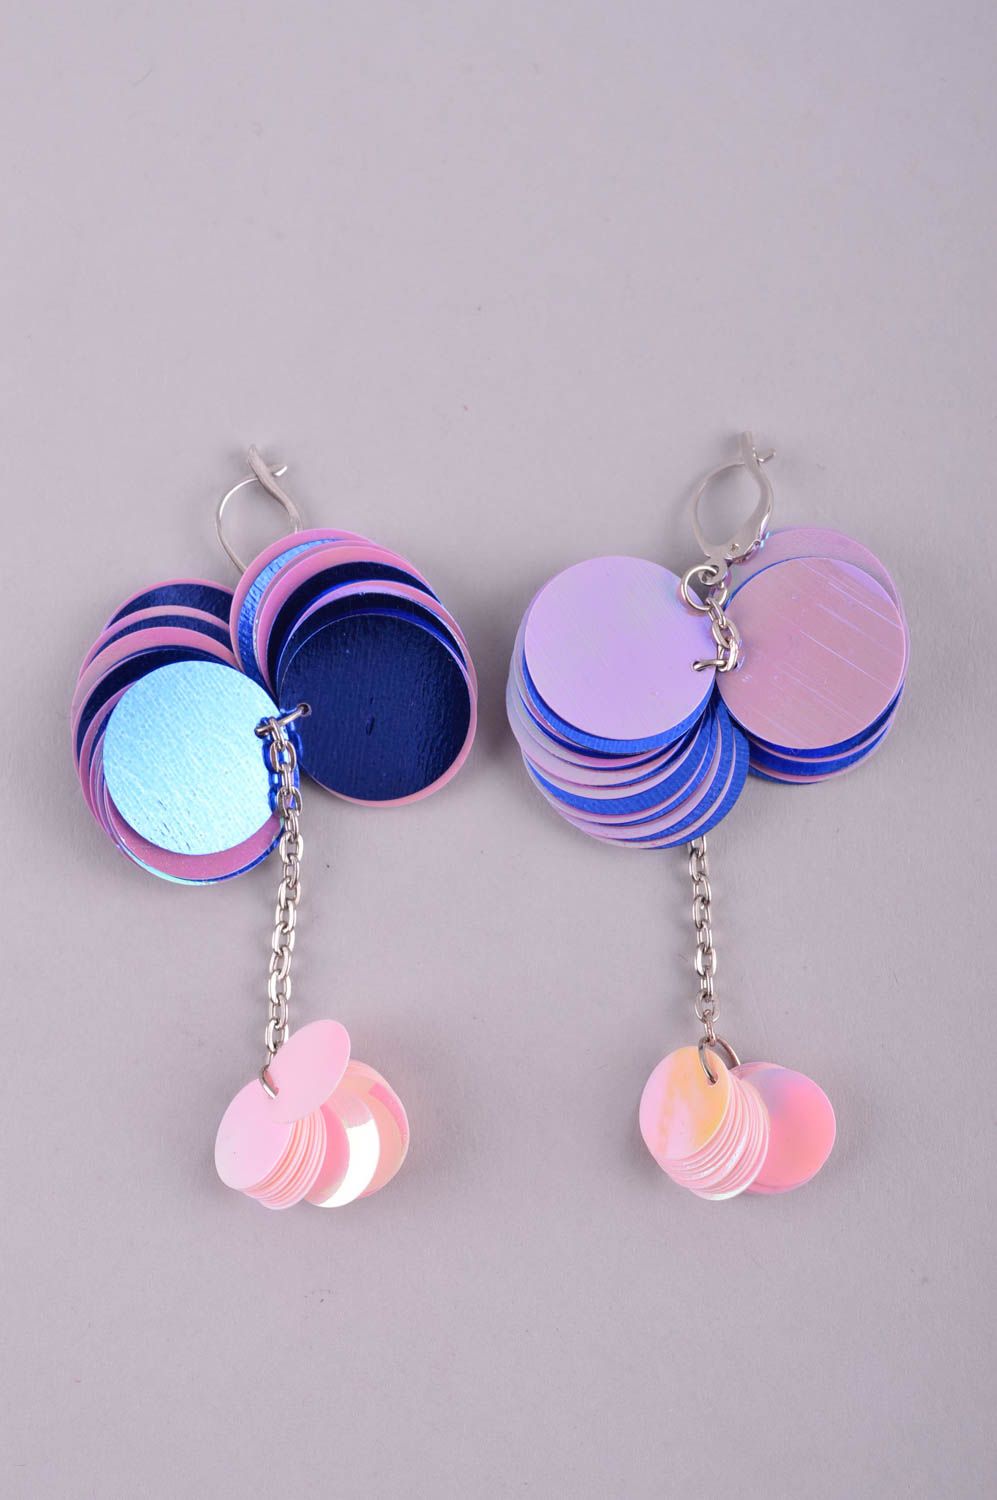 Plastic earrings trendy earrings with charms handmade plastic jewelry for girls photo 3